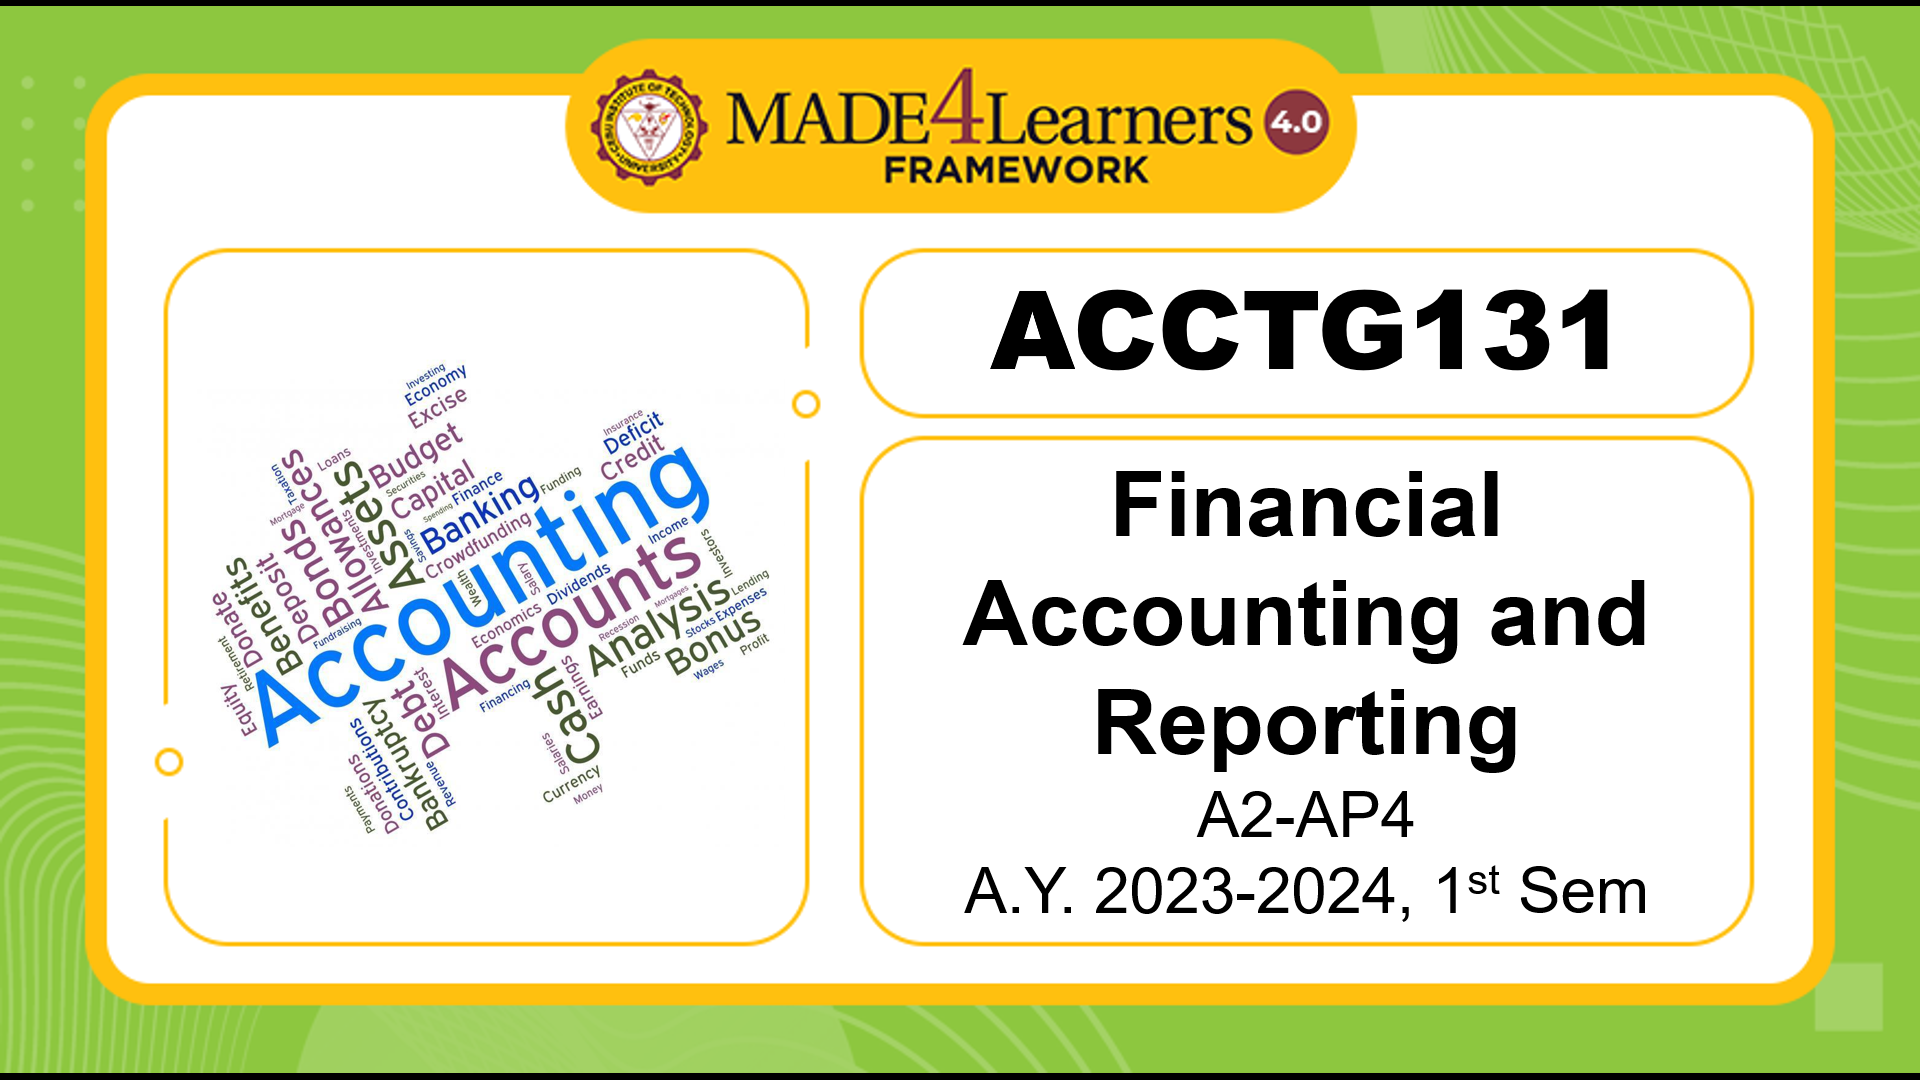 AY23-24 1stSem ACCTG131 A2-AP4 Financial Accounting and Reporting